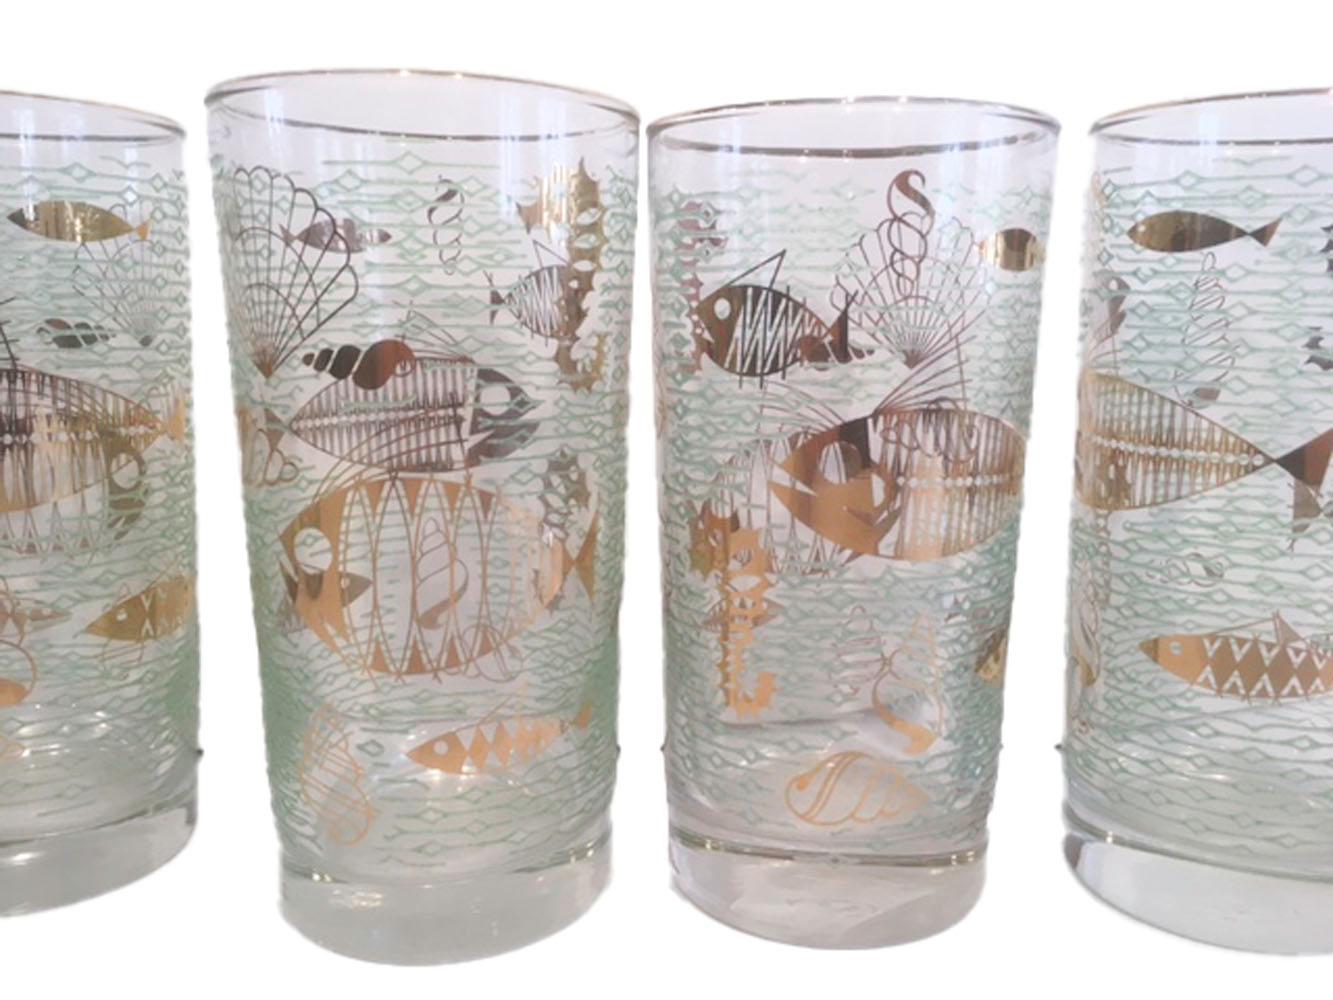 Libbey Glass Co., highball glasses in the Marine Life pattern. Stylizes gold fish, shells and other sea life against a ground of raised stylized waves of translucent green enamel. Libbey discontinued this pattern in 1959. All in excellent condition.